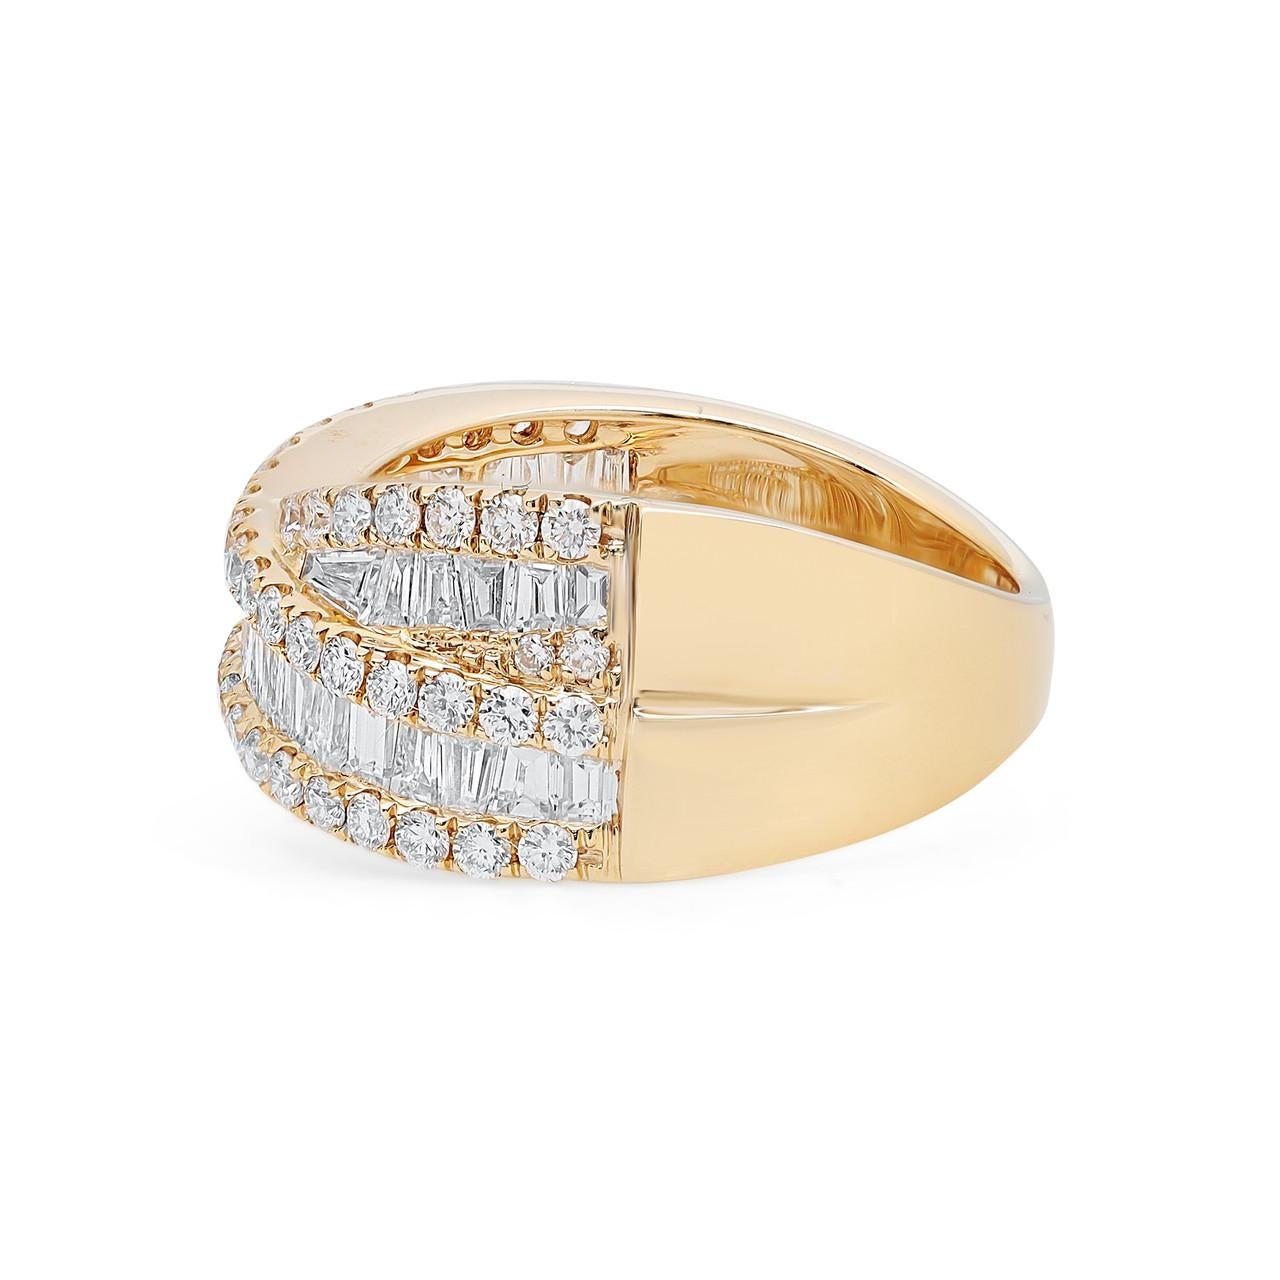 Elevate your style with the dazzling elegance of the 2.00 Carat Round and Baguette Diamond Crossover Fashion Ring in 18K Yellow Gold. Perfect for any occasion, this magnificent ring beautifully celebrates your love and individuality. Crafted with